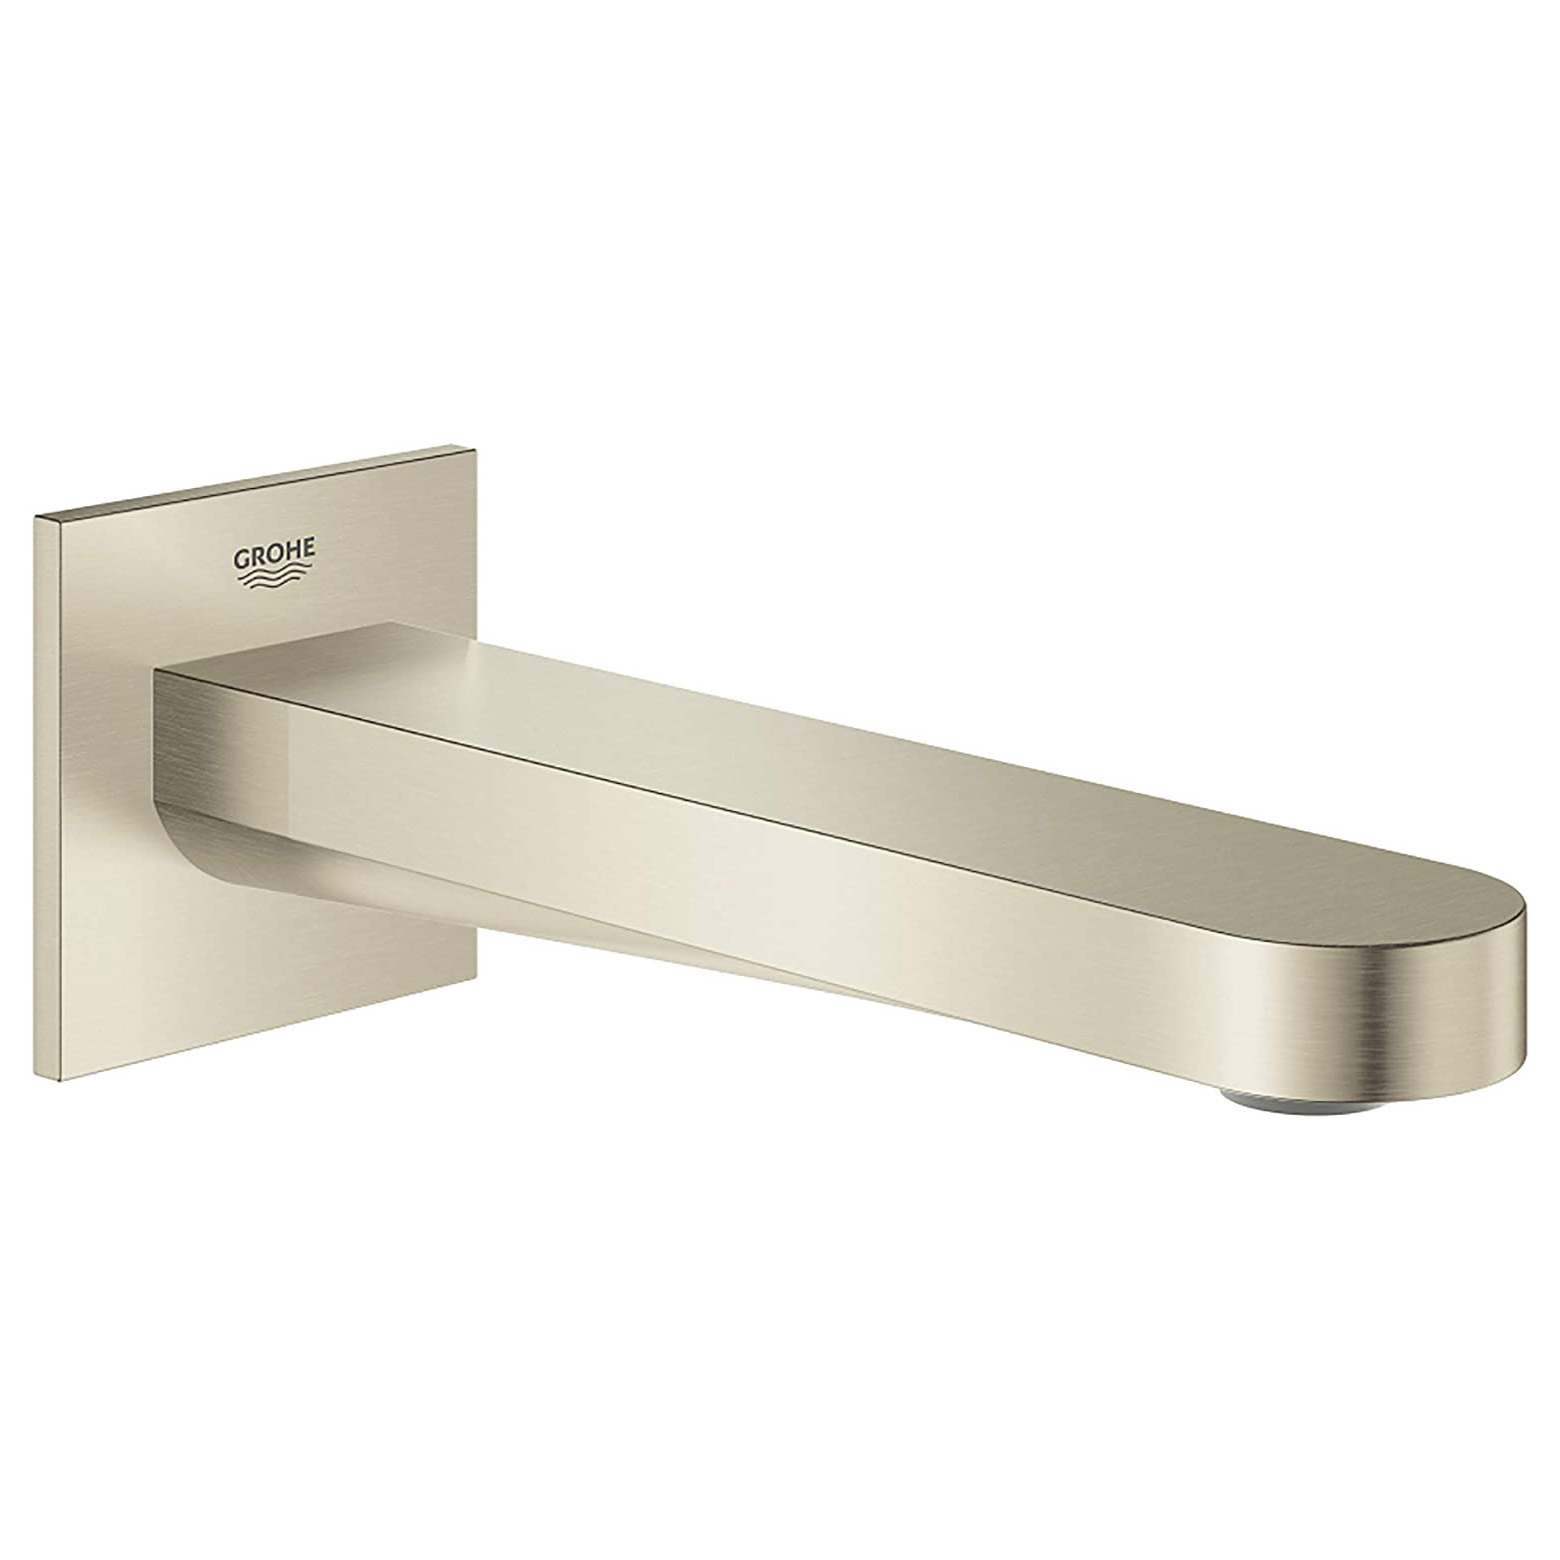 Plus 6" Tub Spout in Brushed Nickel